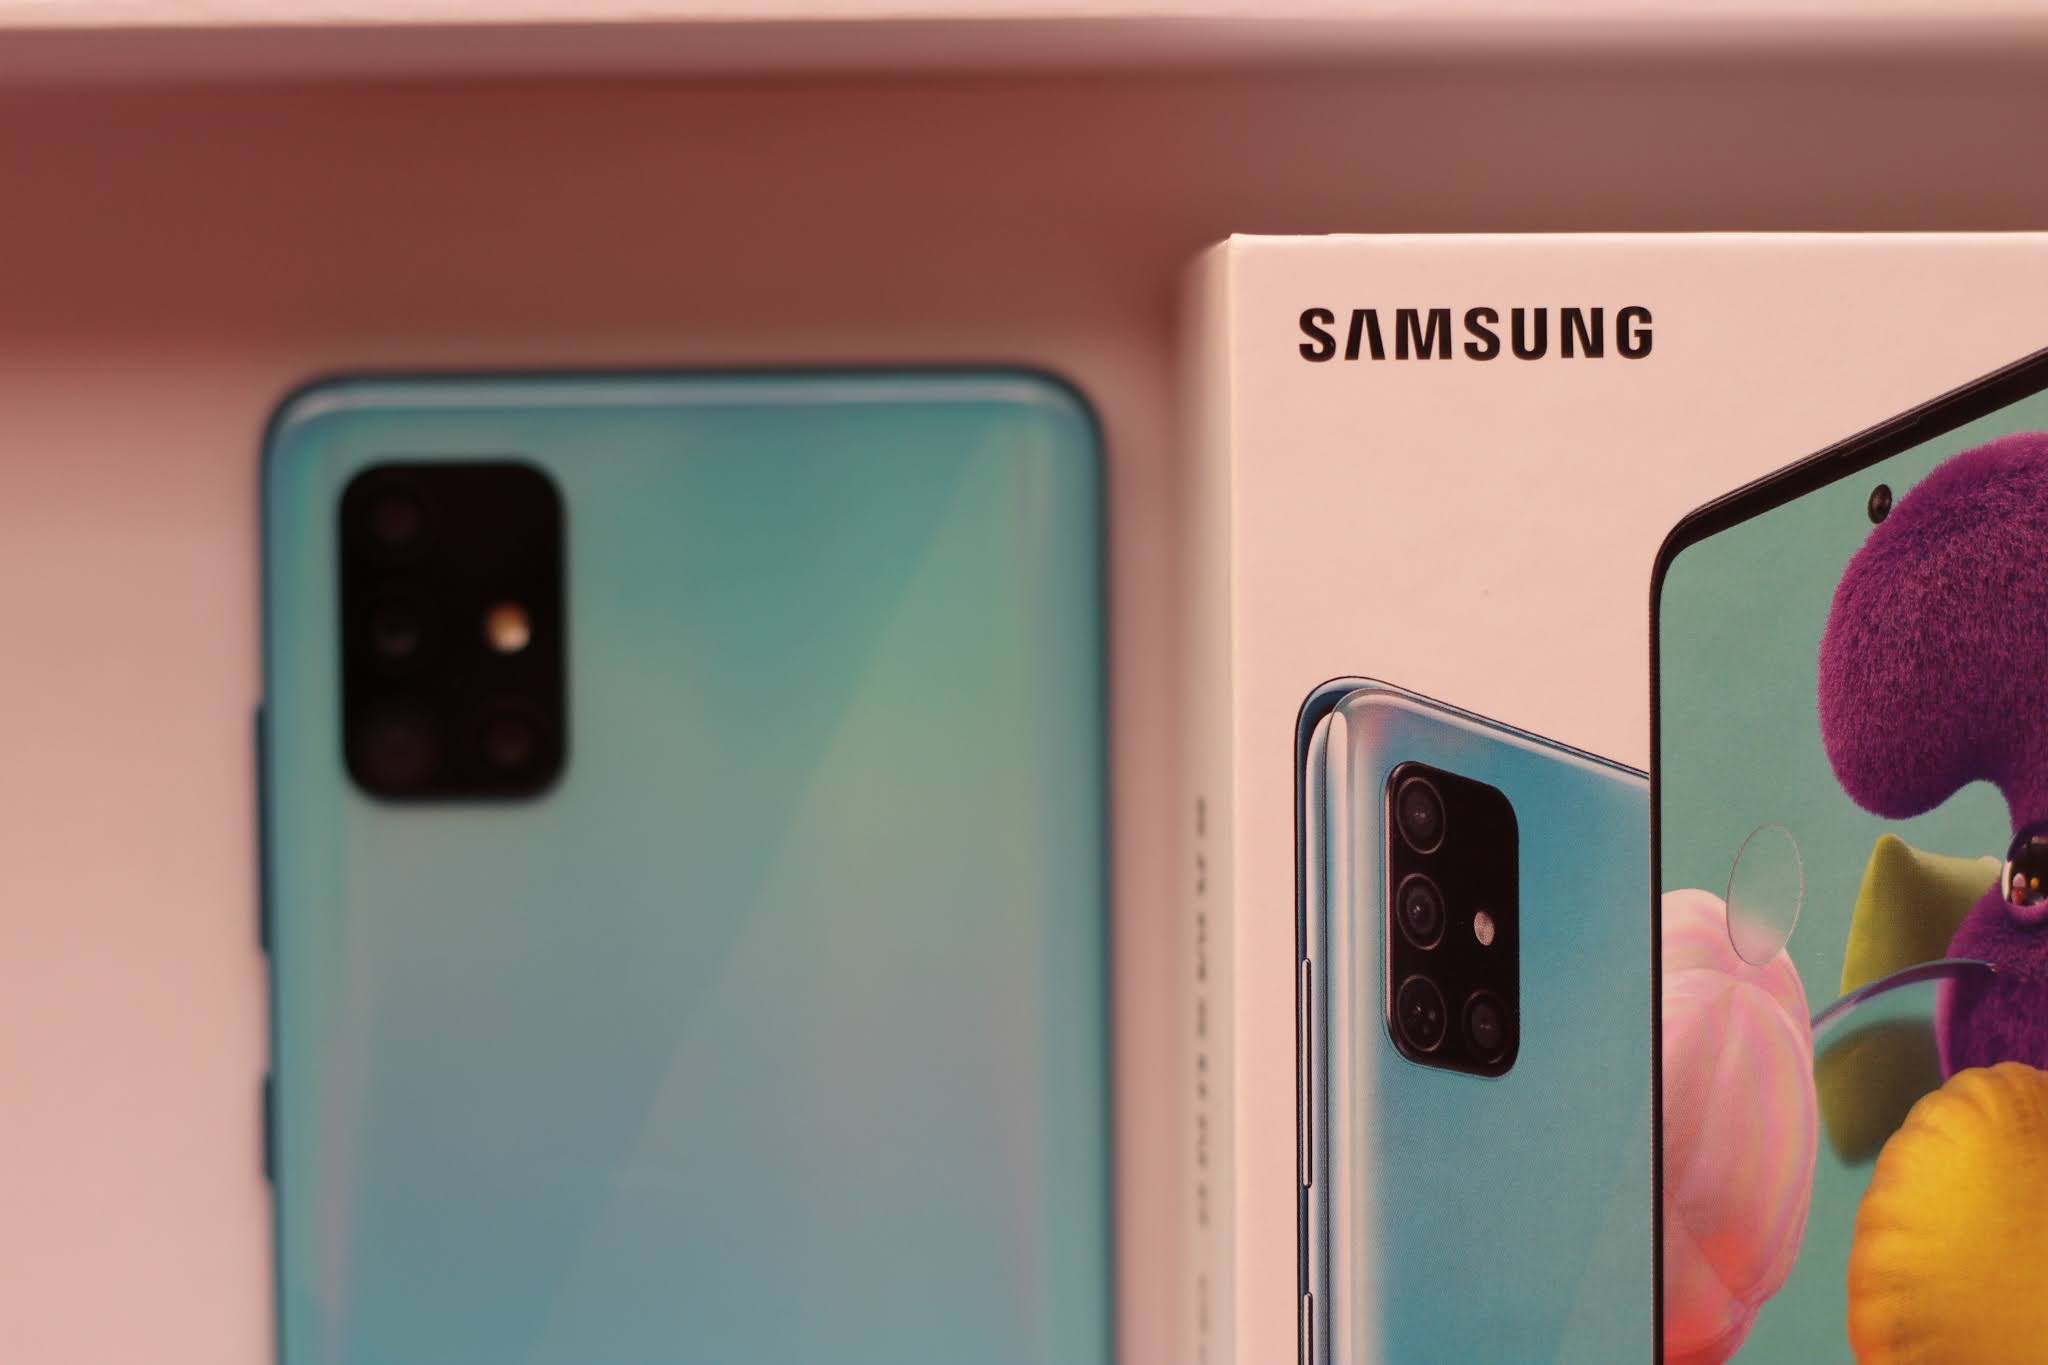 SAMSUNG GALAXY A22s INDONESIA, GALAXY A22 (5G + 4G): PRICE REVIEW AND NEW RELEASE SPECIFICATION 2021